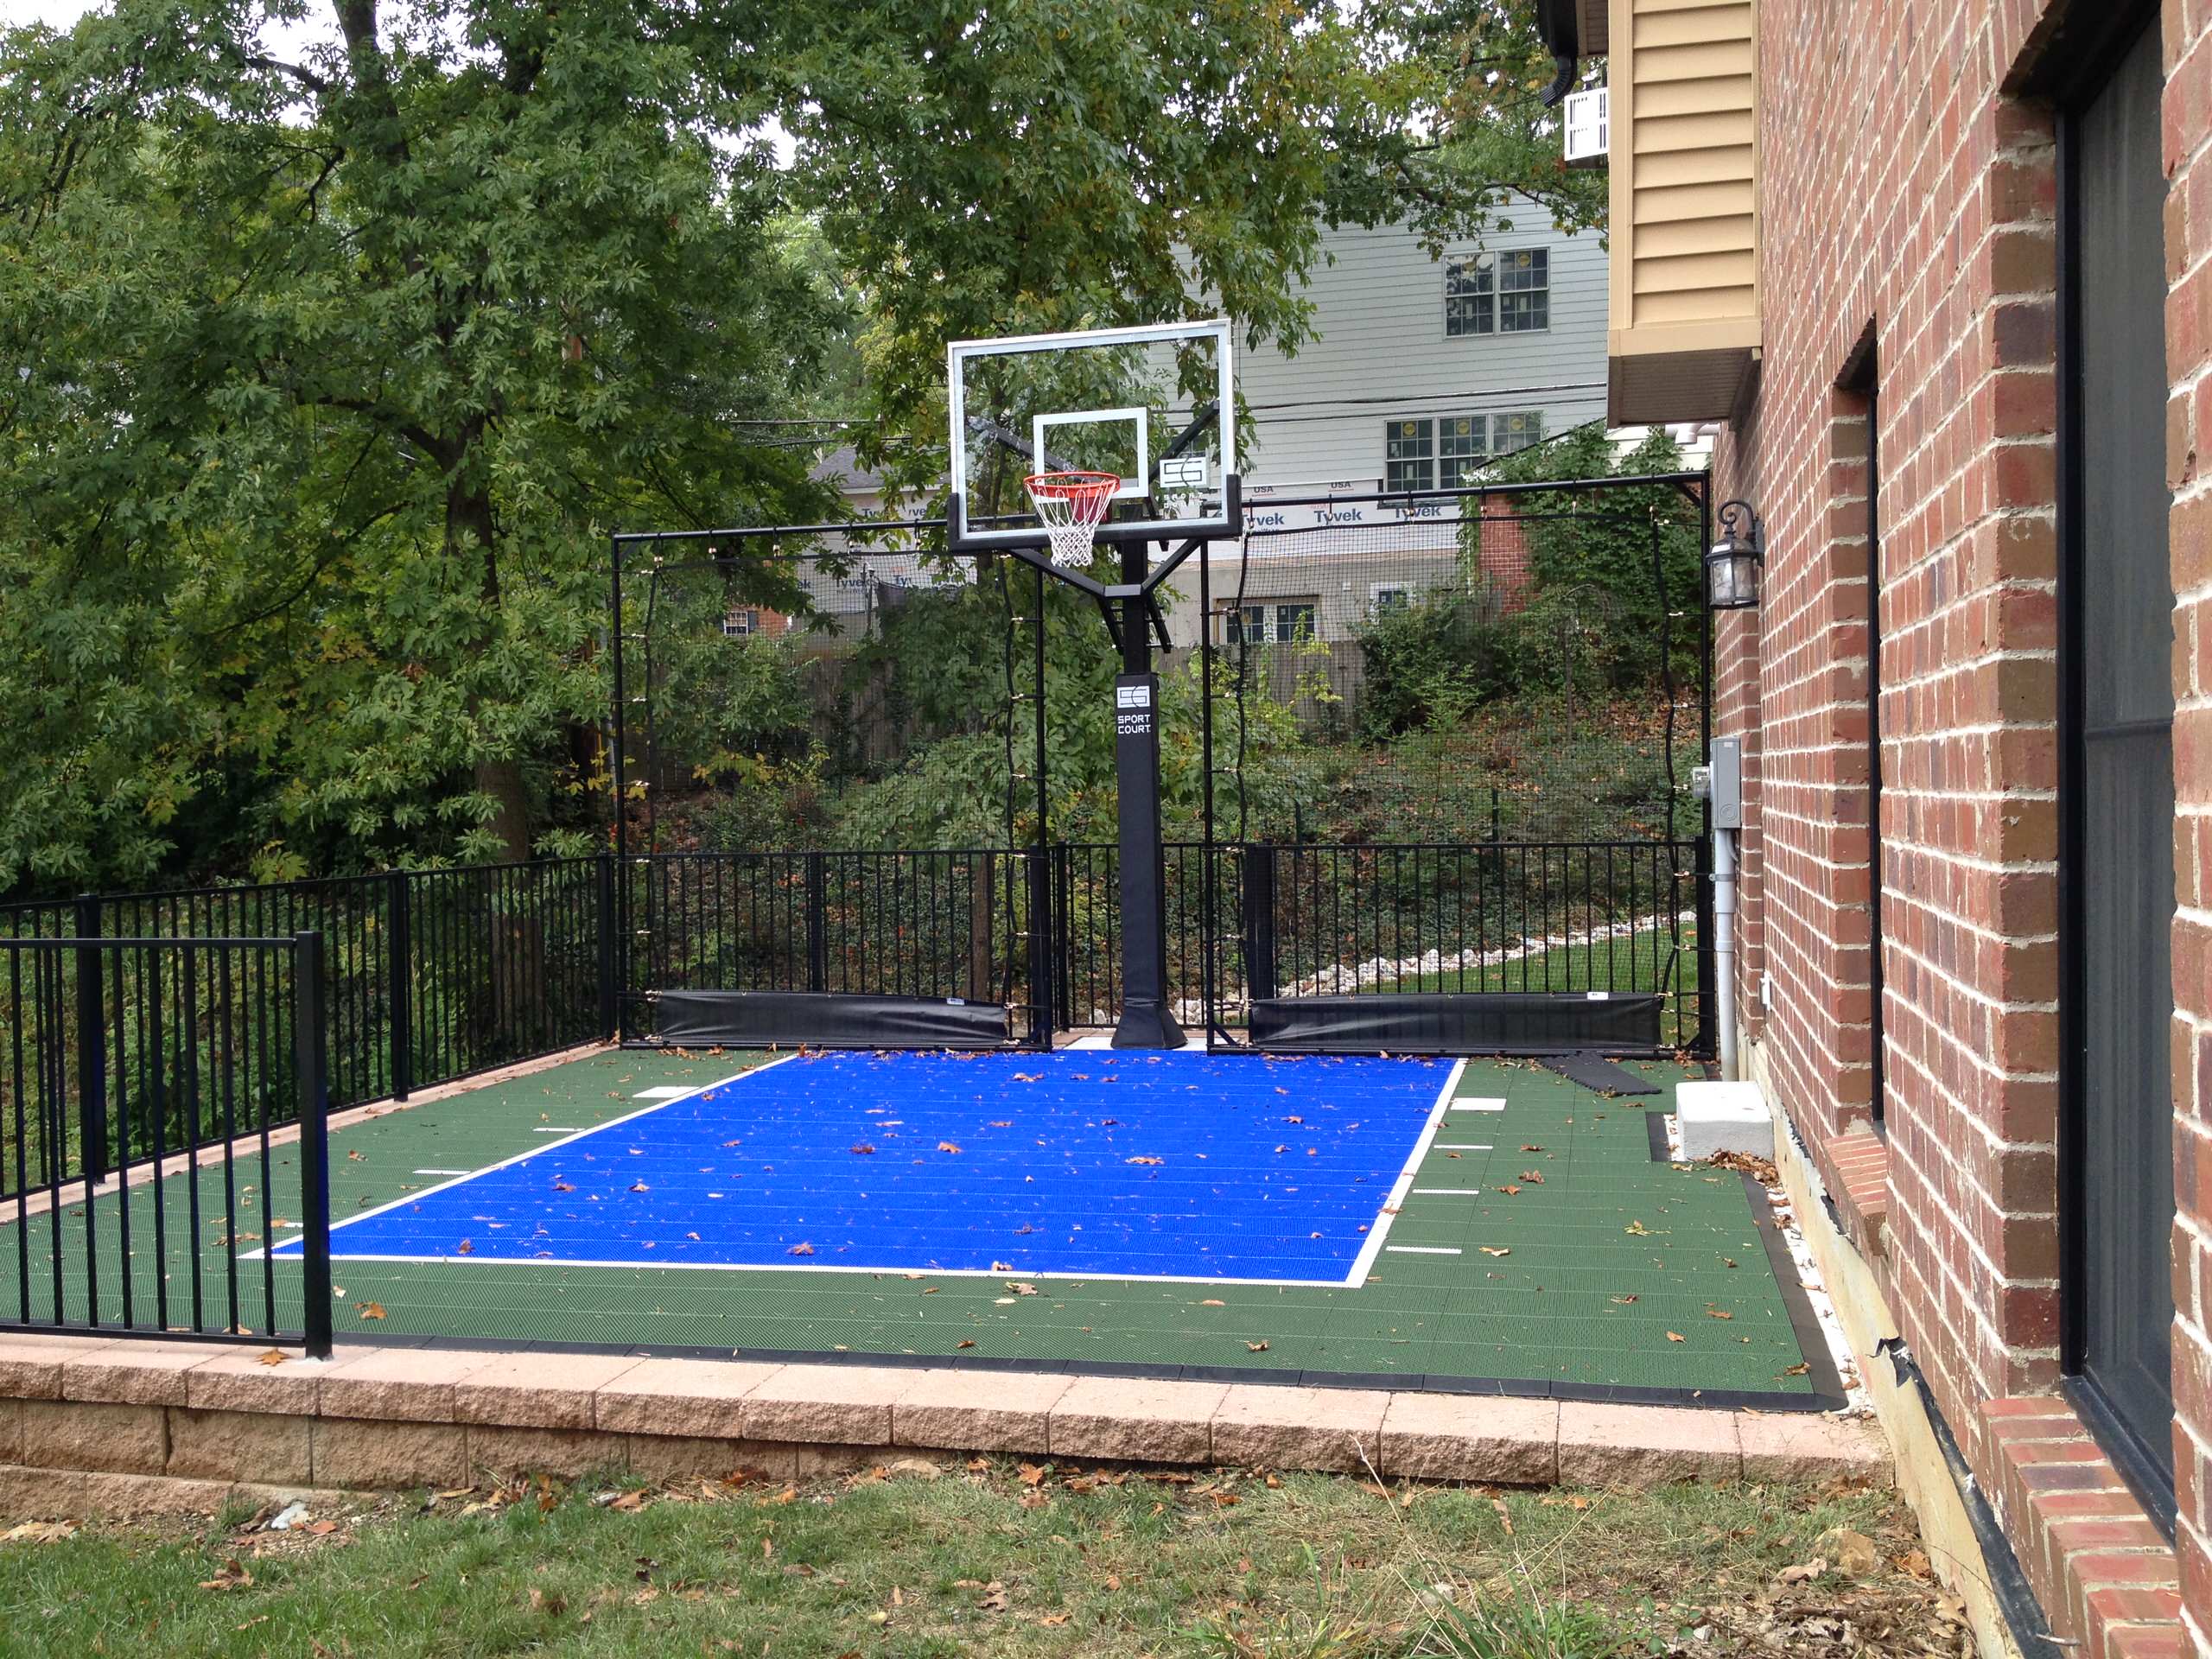 75 Beautiful Small Outdoor Sport Court Pictures Ideas December 2020 Houzz